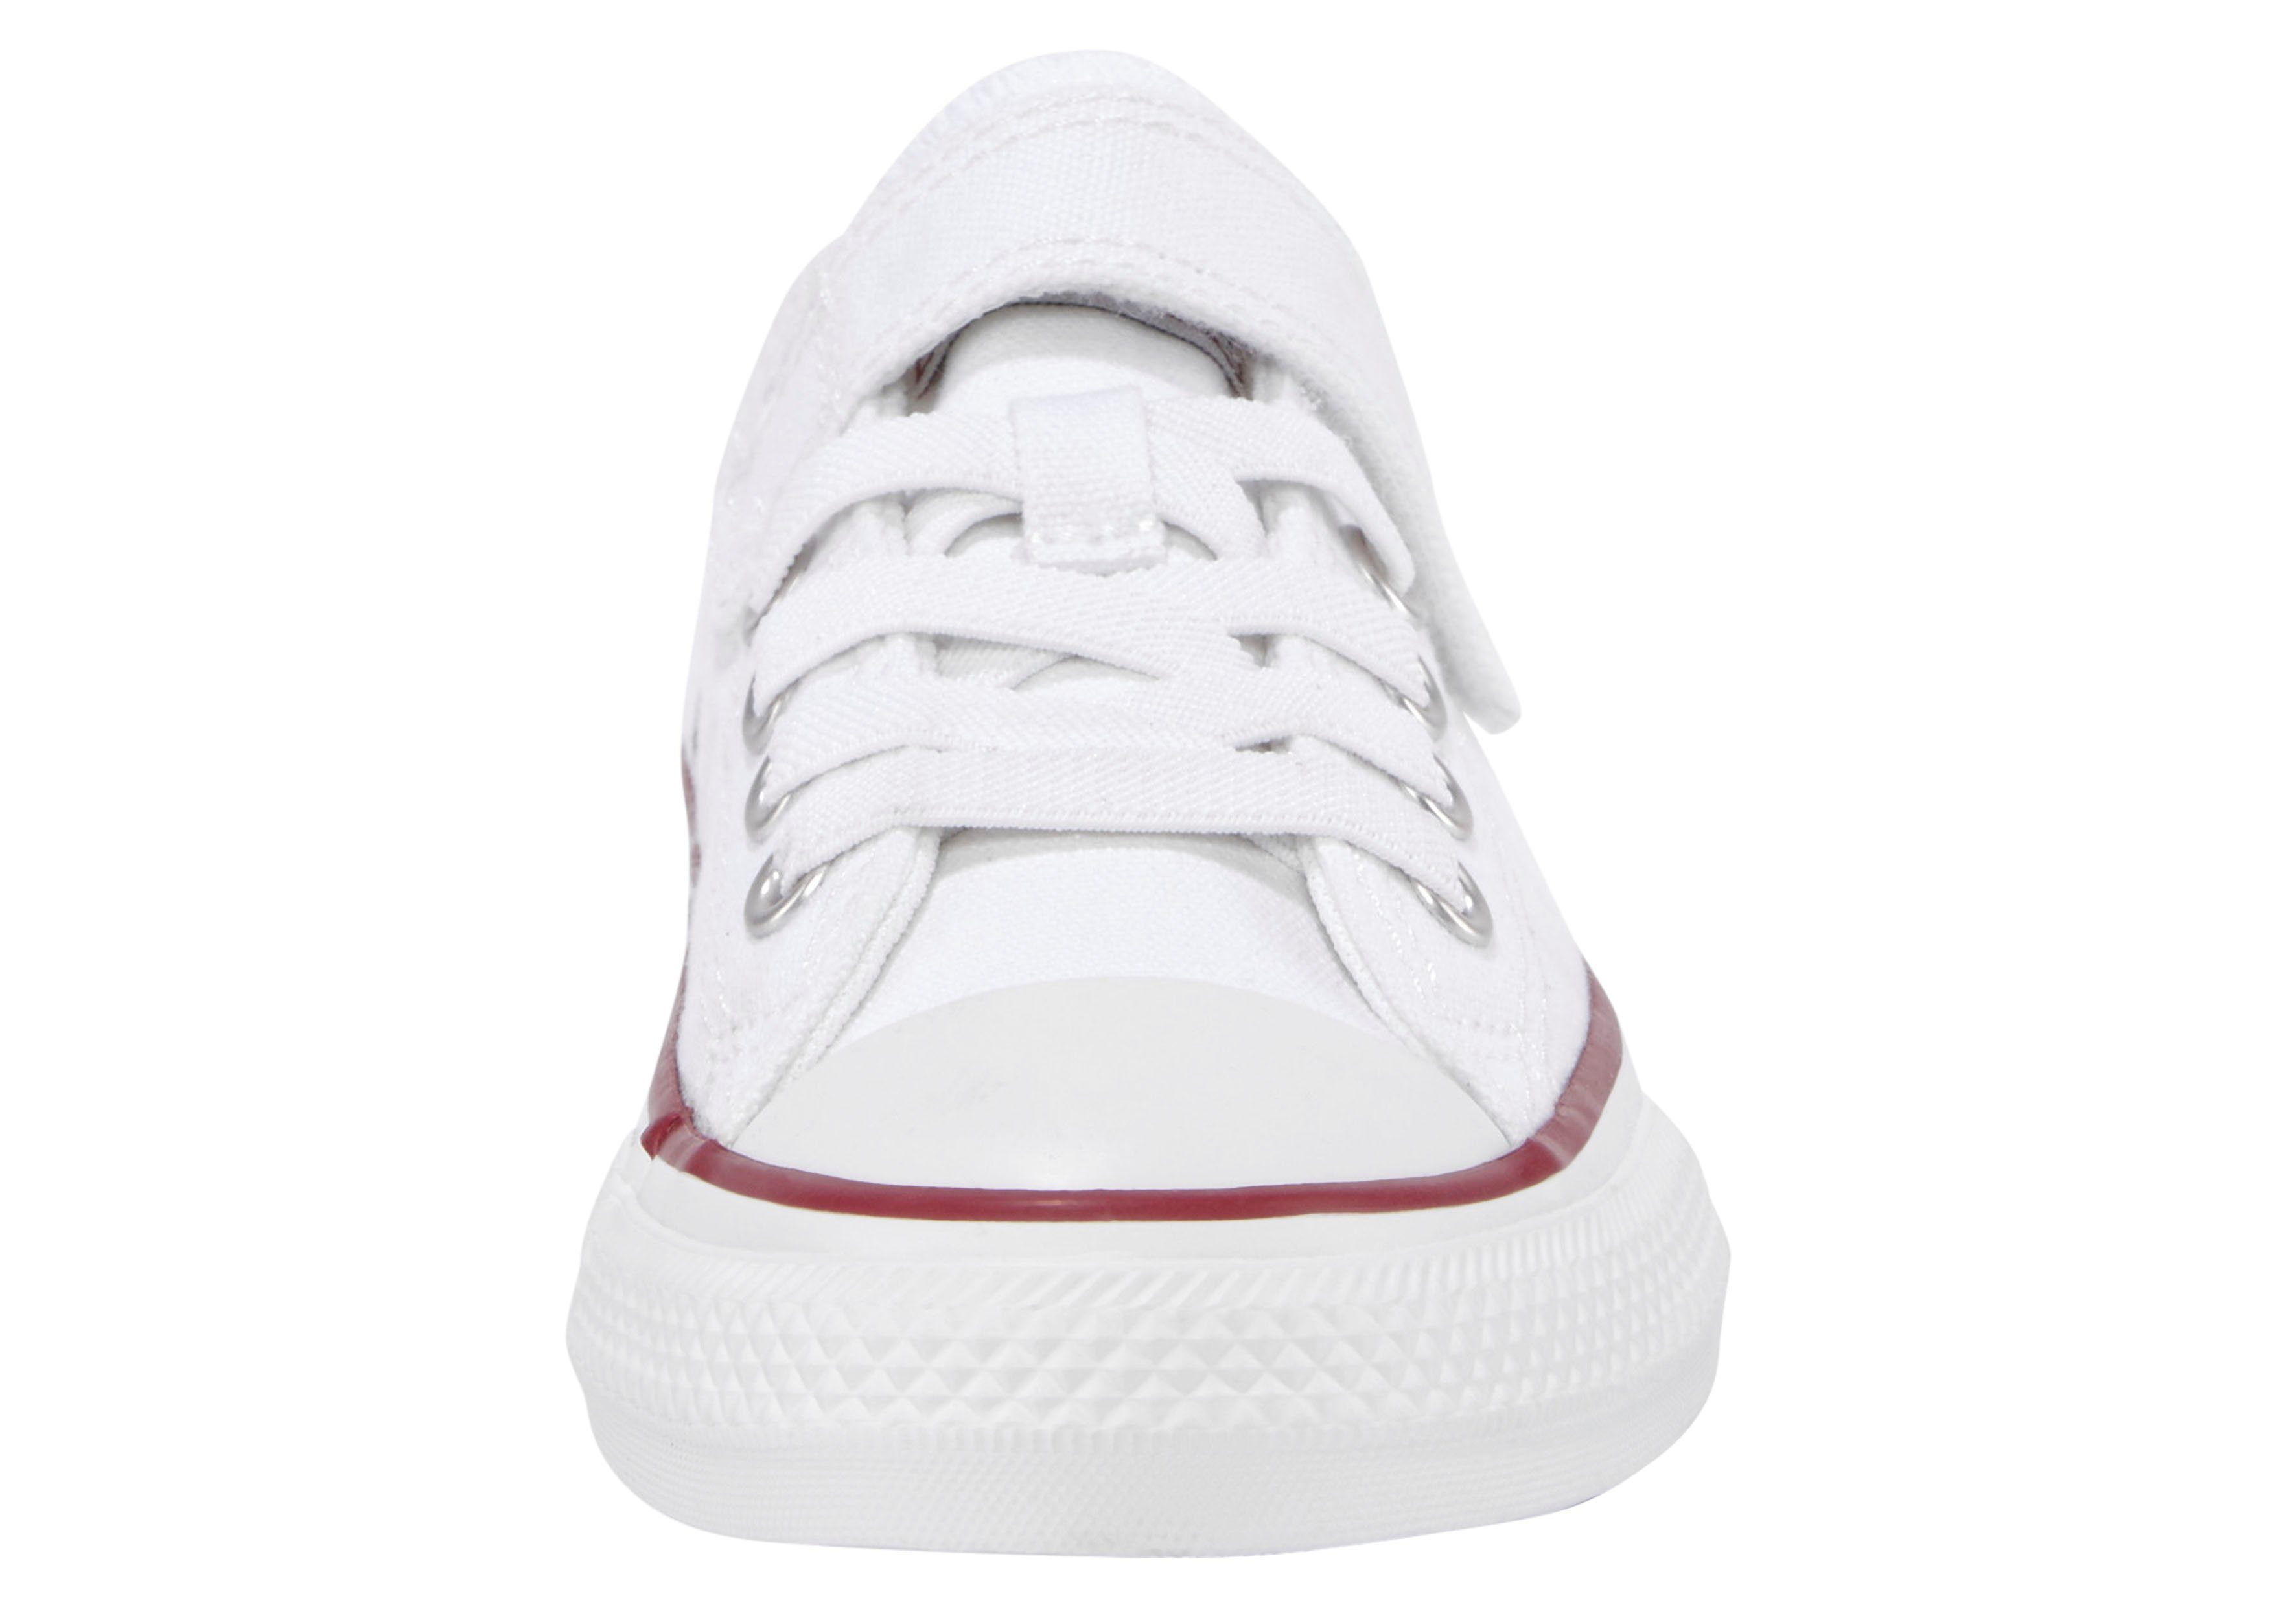 Schuhe Alle Sneaker Converse CHUCK TAYLOR ALL STAR 1V EASY-ON Ox Sneaker